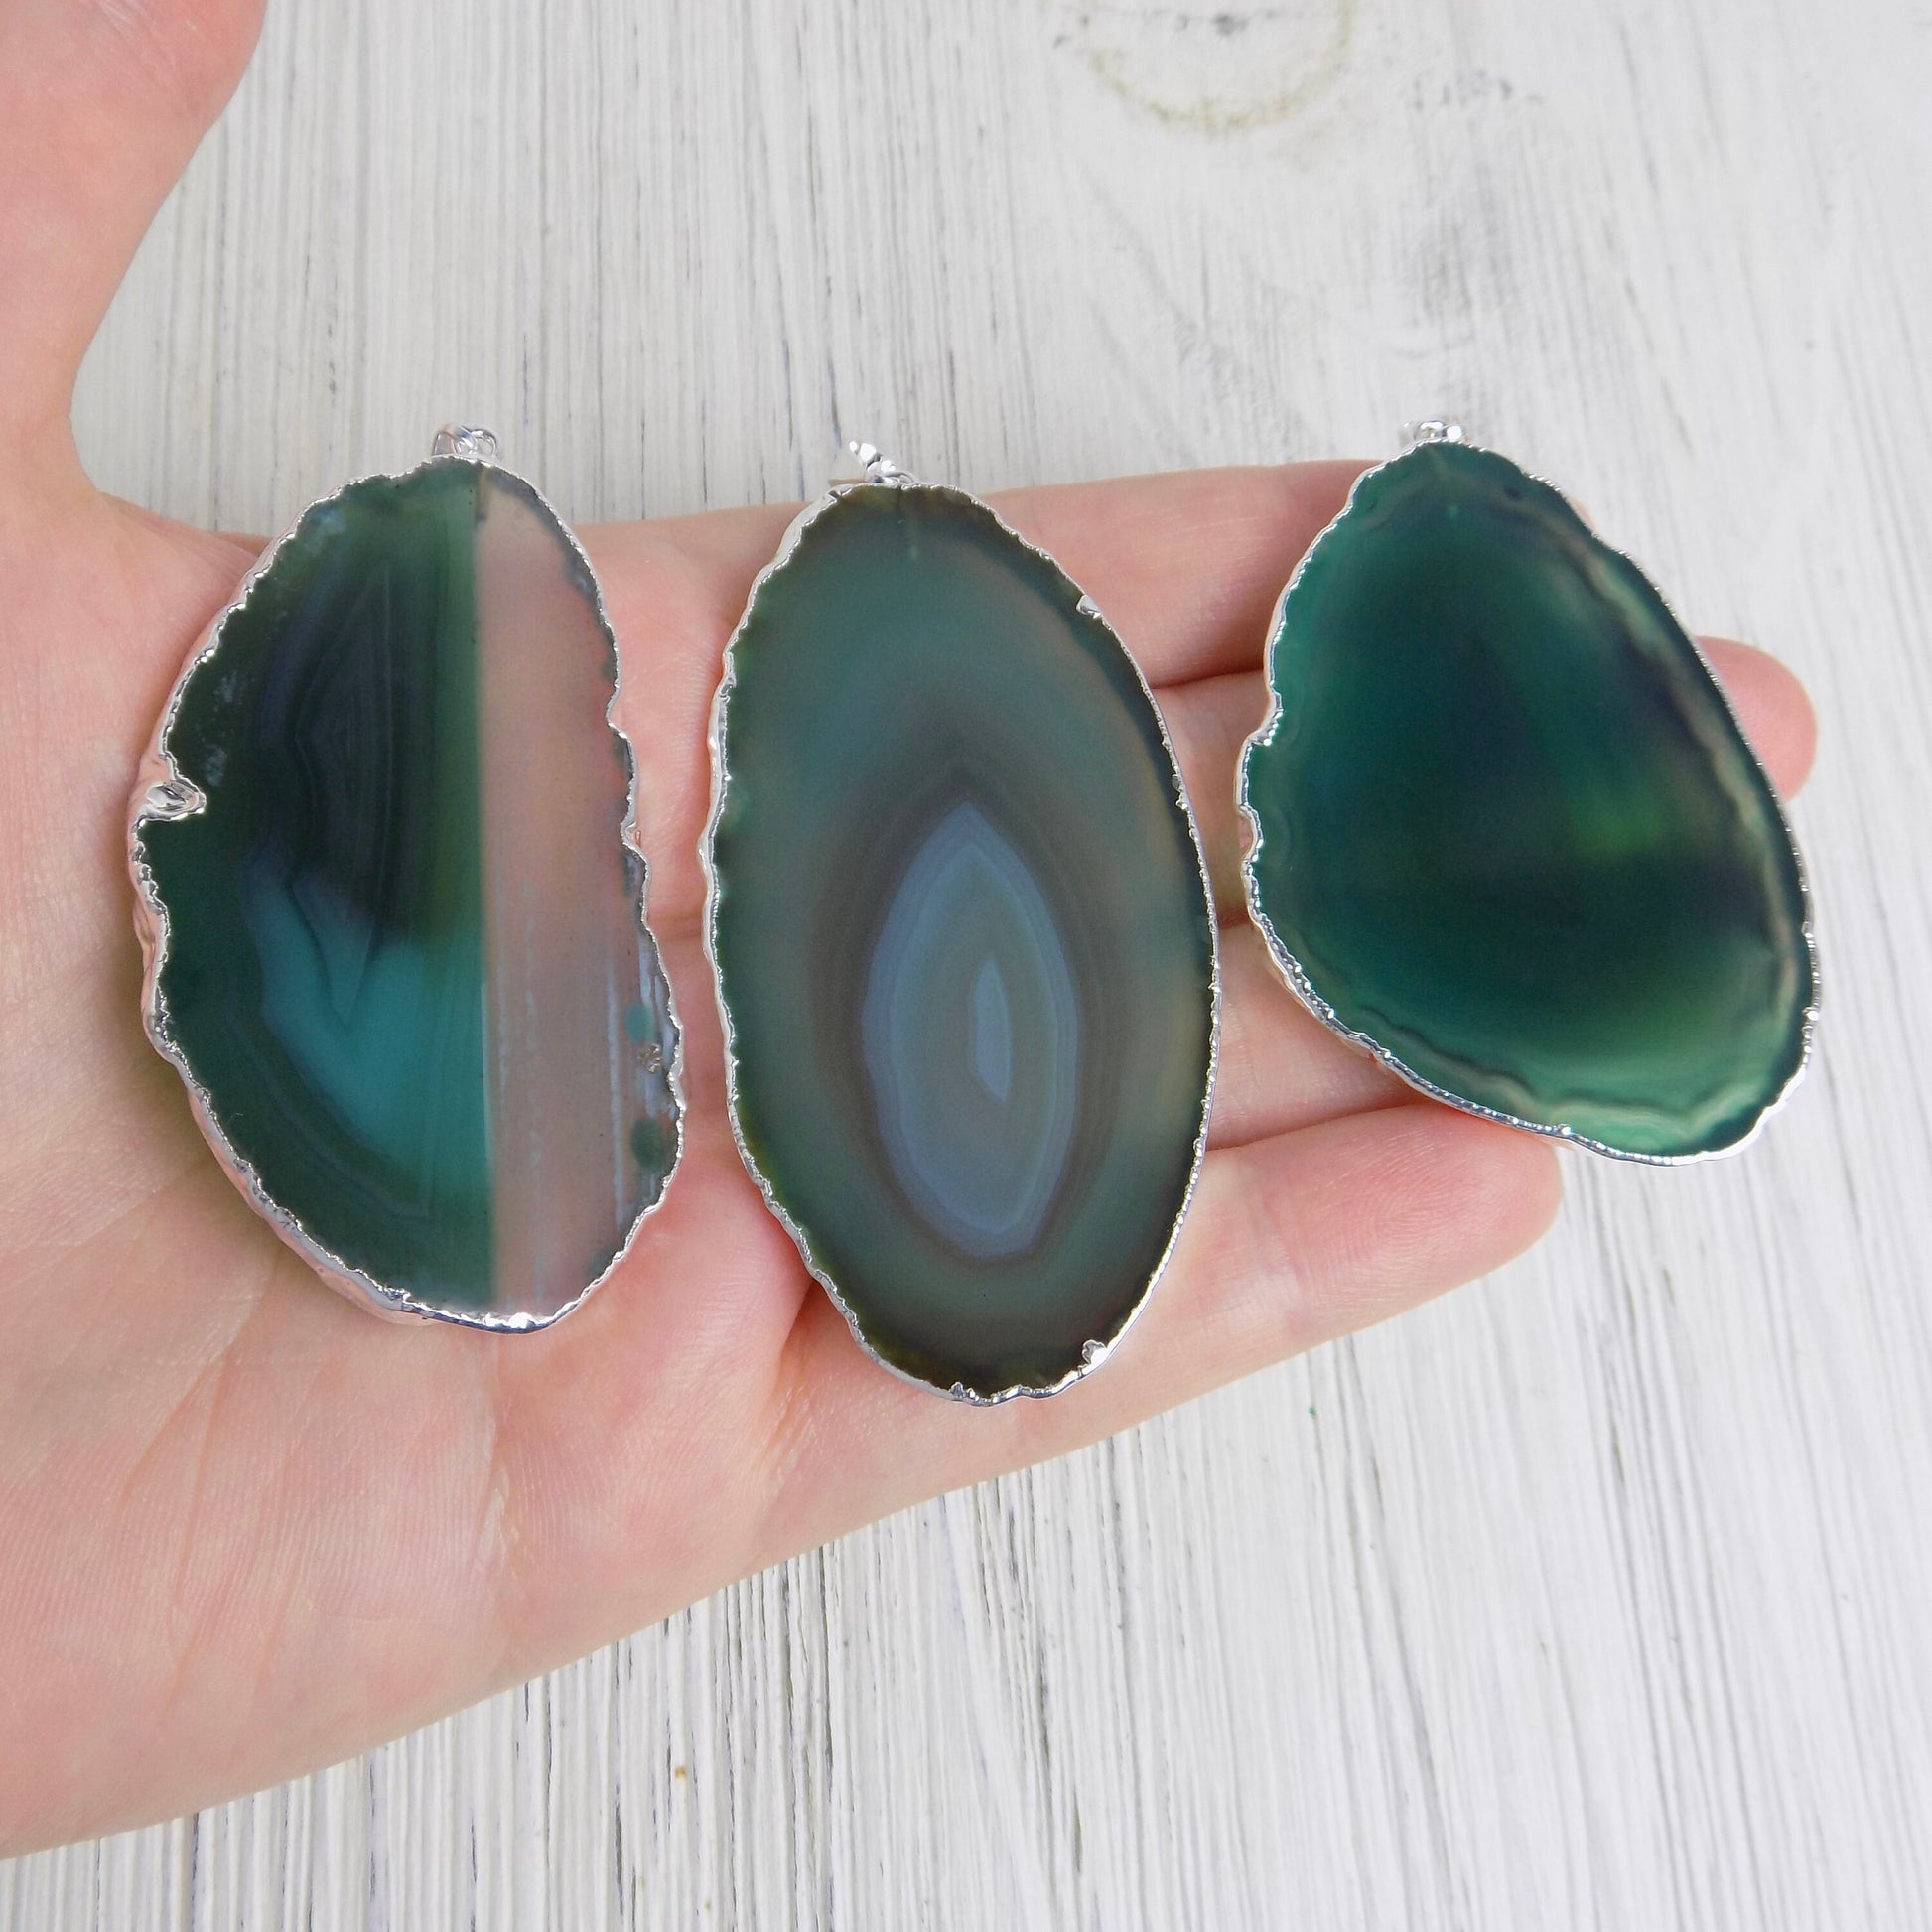 Agate Necklace Silver, Green Agate Pendant Necklace, Sliced Agate Statement Necklace, Boho Long Stone Necklace, Geode Necklace, G13-258